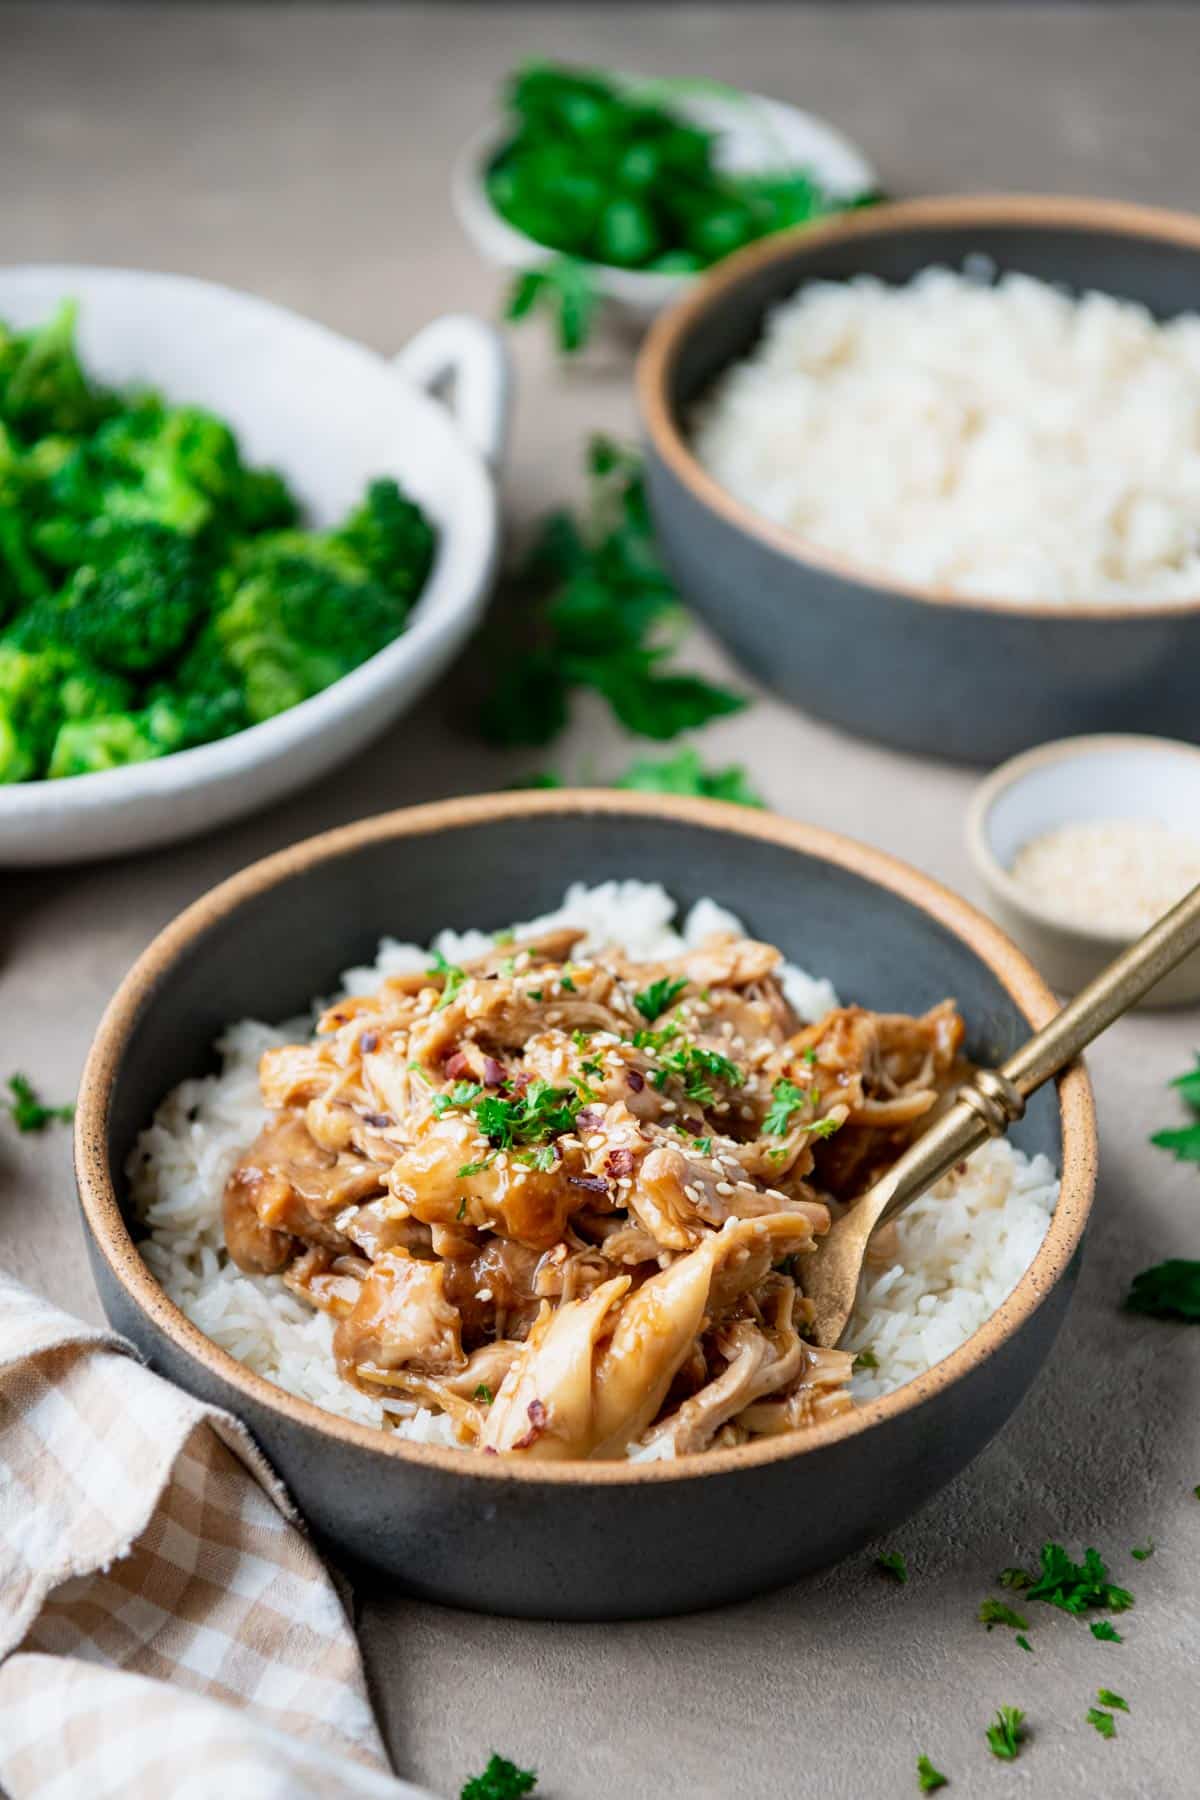 Crock pot shredded chicken with maple soy sauce over rice.